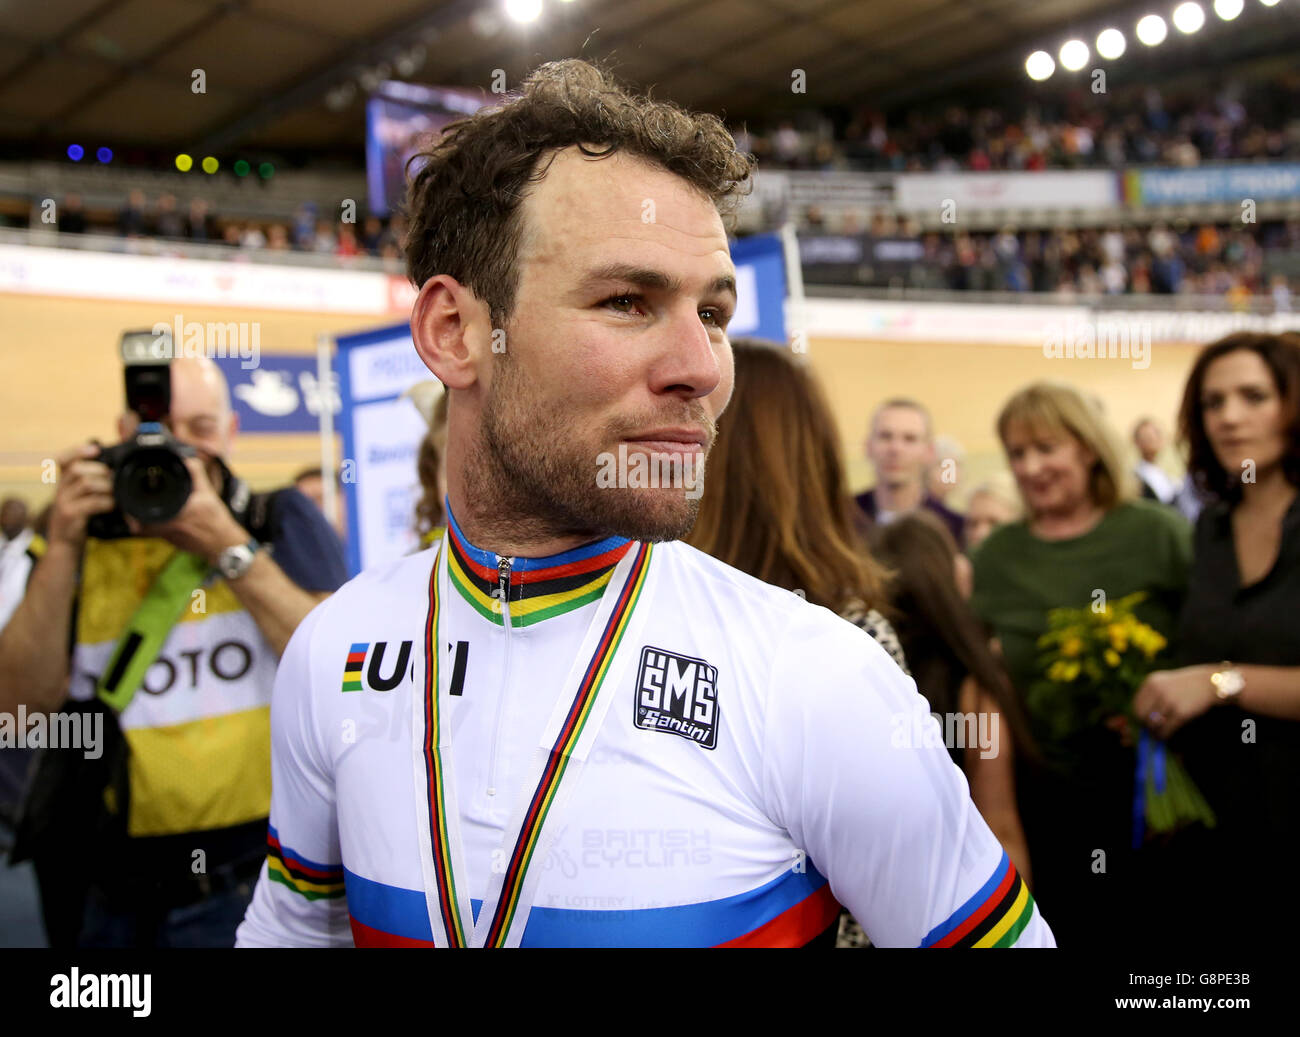 Great Britain's Mark Cavendish after winning the Men's Madison during day five of the UCI Track Cycling World Championships at Lee Valley VeloPark, London. Stock Photo